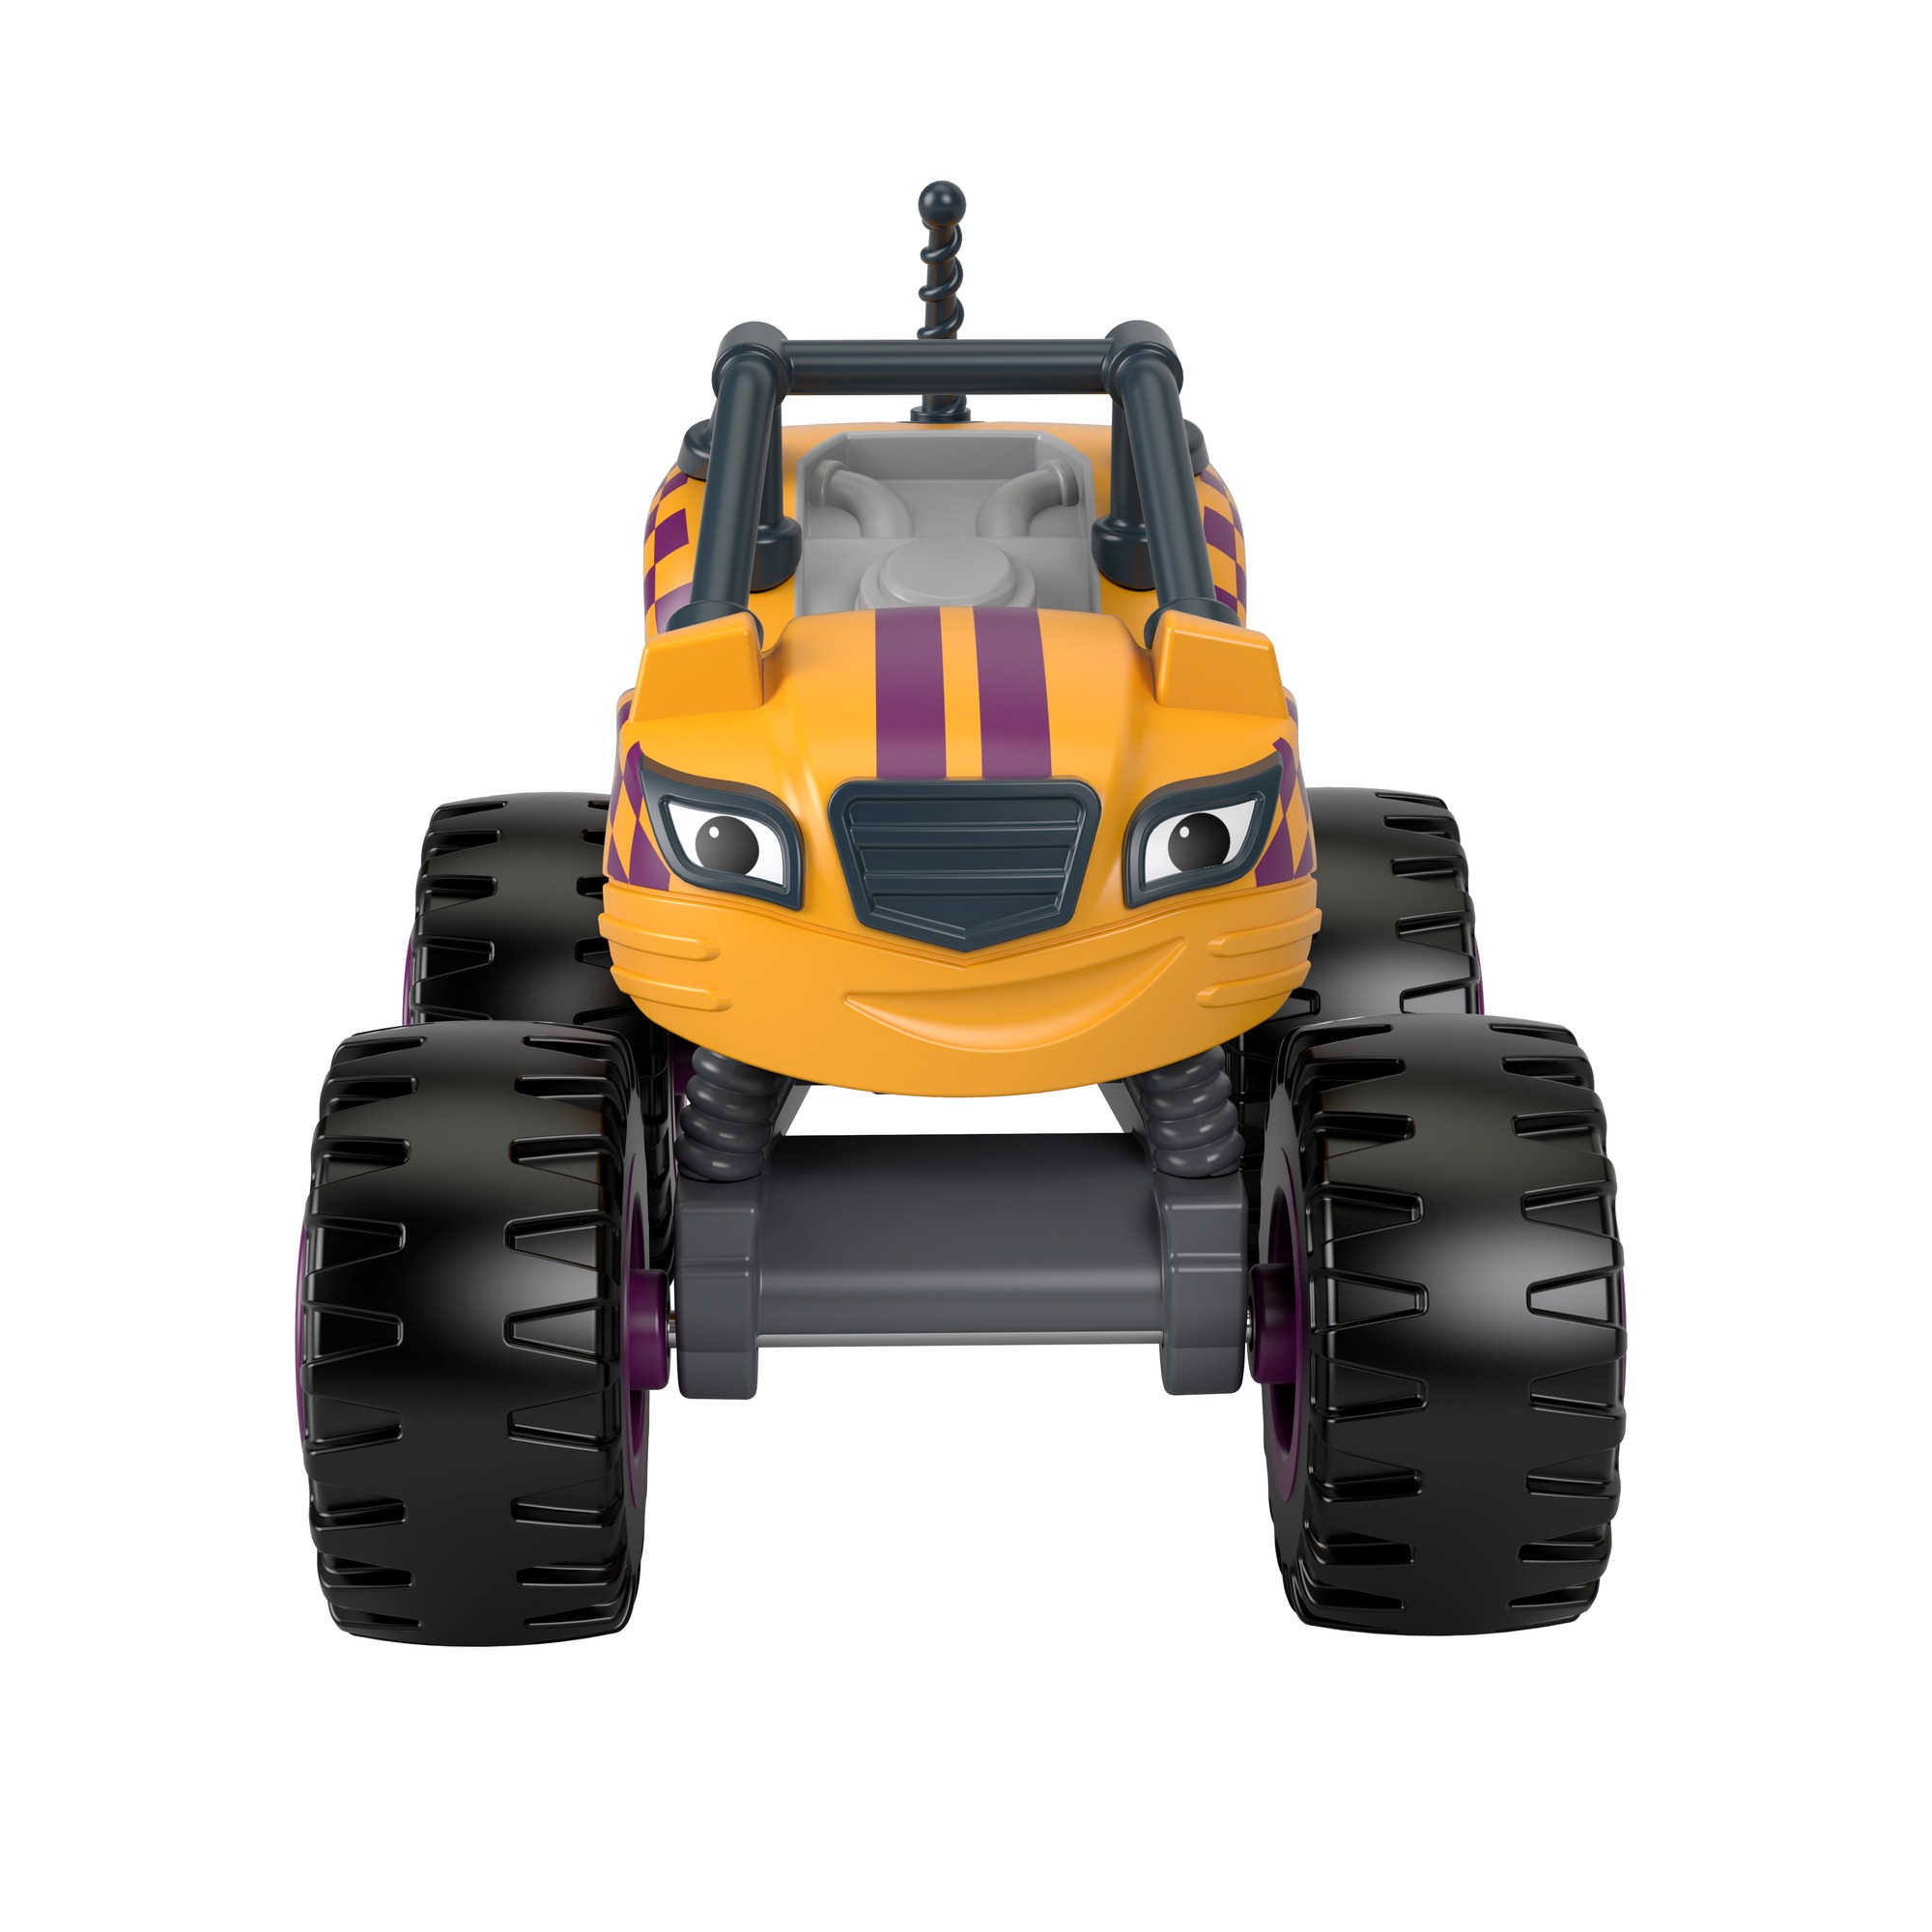 Fisher-Price Blaze & the Monster Machines Diecast Monster Truck Collection, Styles May Vary - image 5 of 6